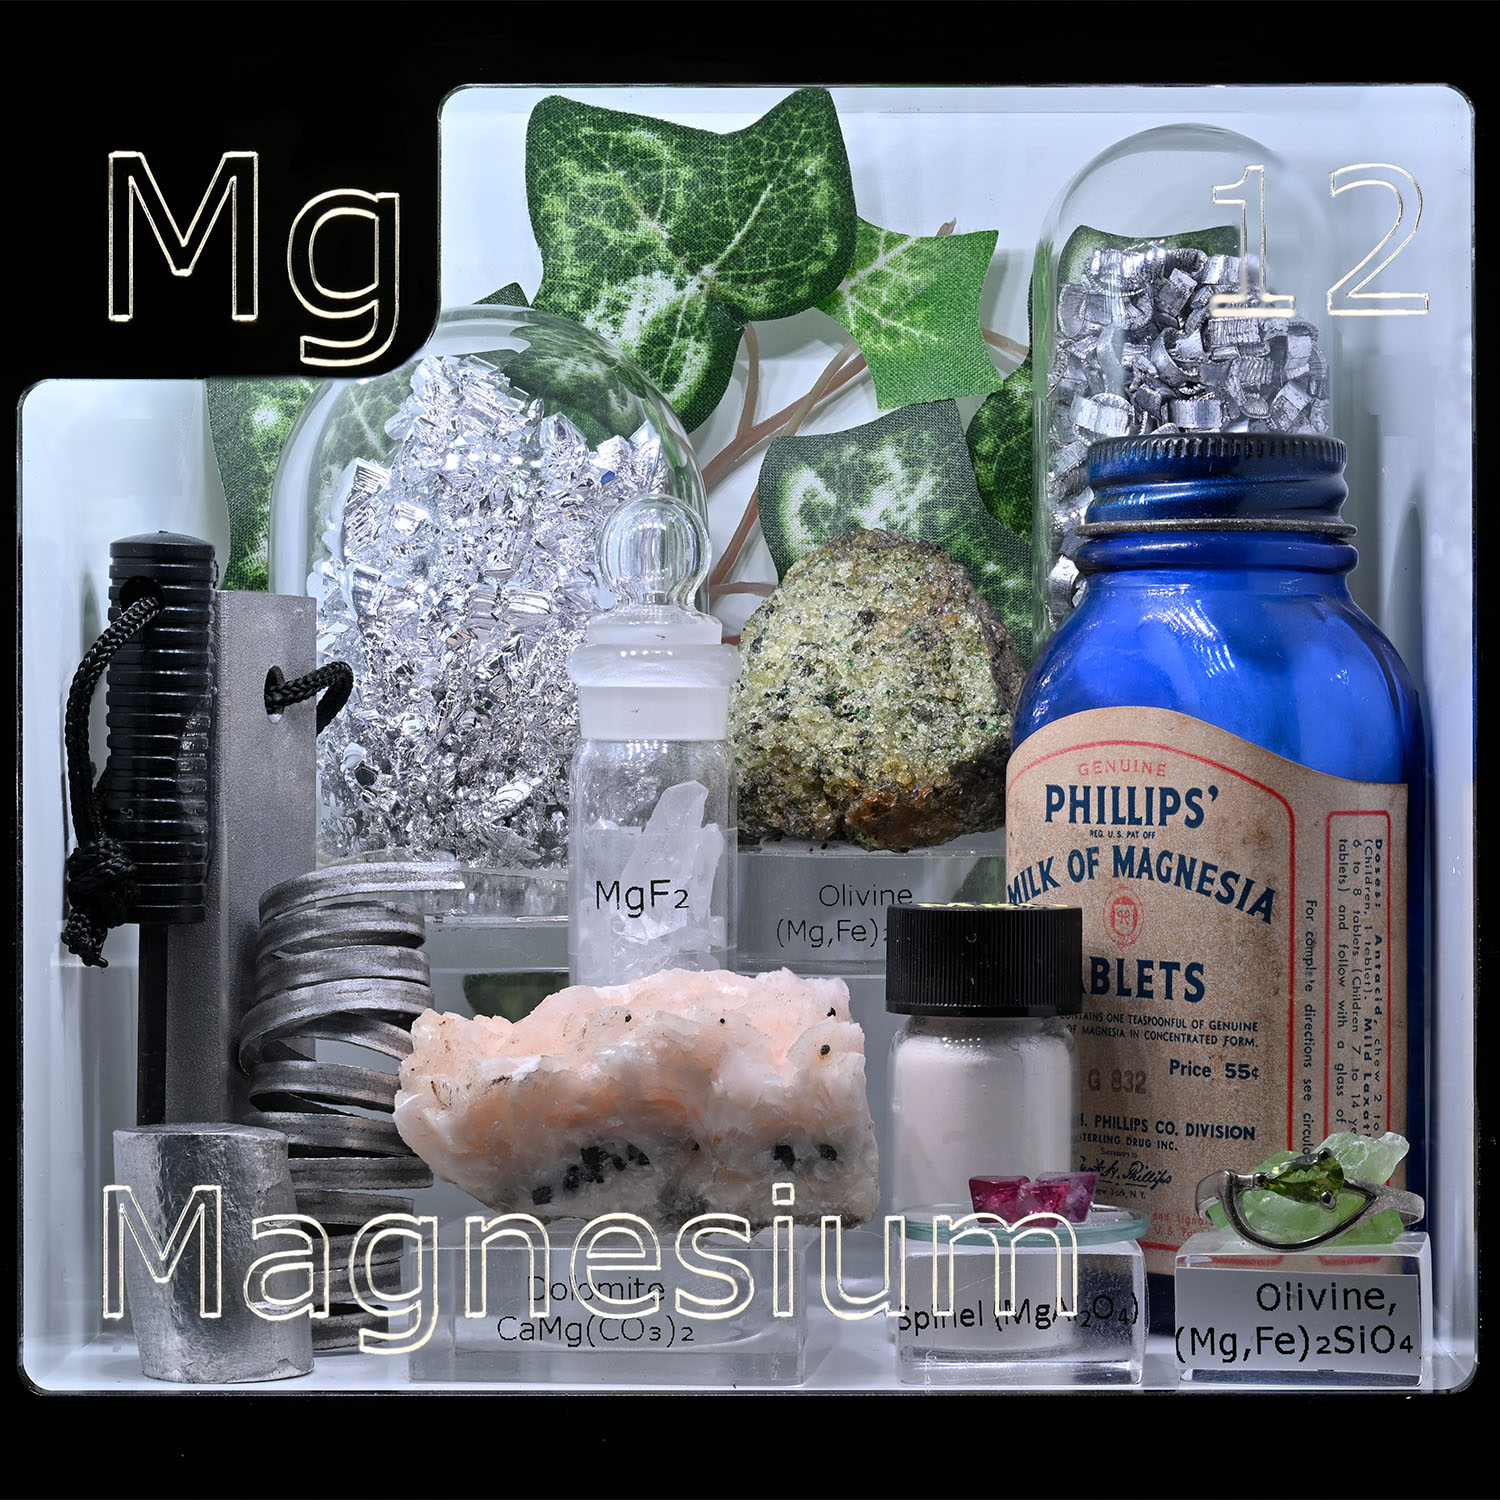 Periodic Table Display - close up of Magnesium and the items that contain that element